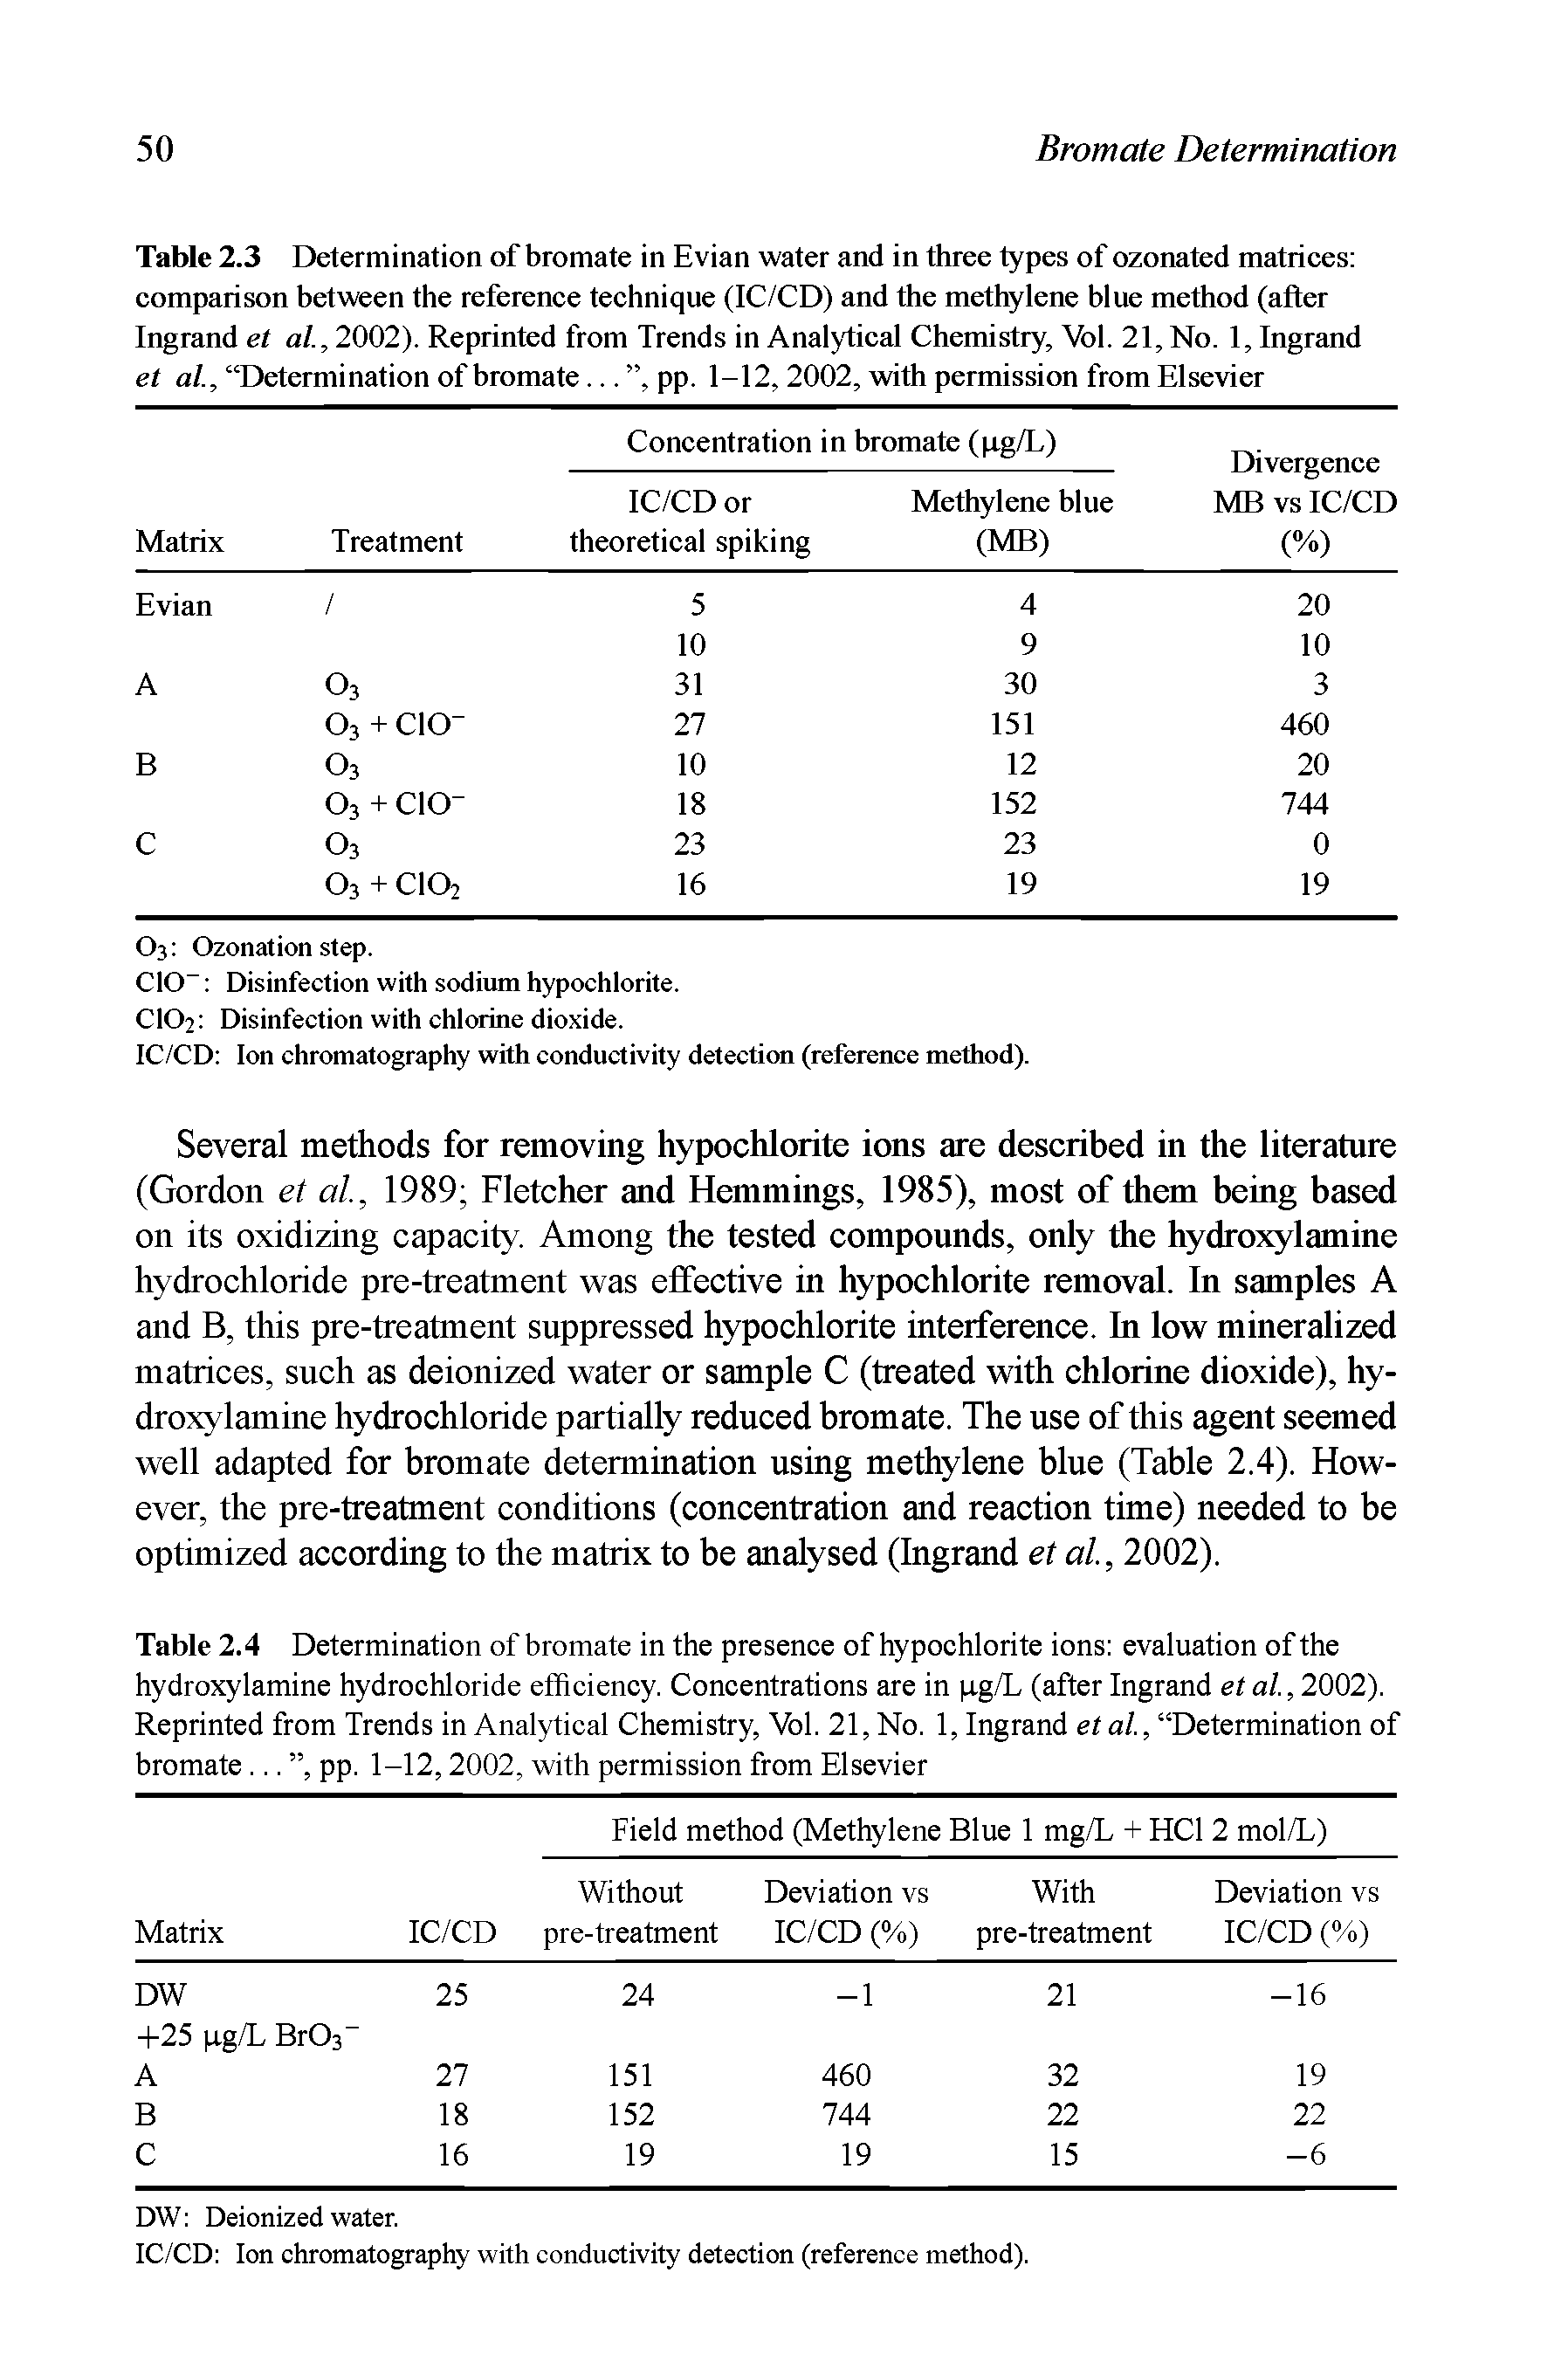 Table 2.4 Determination of bromate in the presence of hypochlorite ions evaluation of the hydroxylamine hydrochloride efficiency. Concentrations are in gg/L (after Ingrand et at, 2002). Reprinted from Trends in Analytical Chemistry, Vol. 21, No. 1, Ingrand er a/., Determination of bromate... , pp. 1-12,2002, with permission from Elsevier...